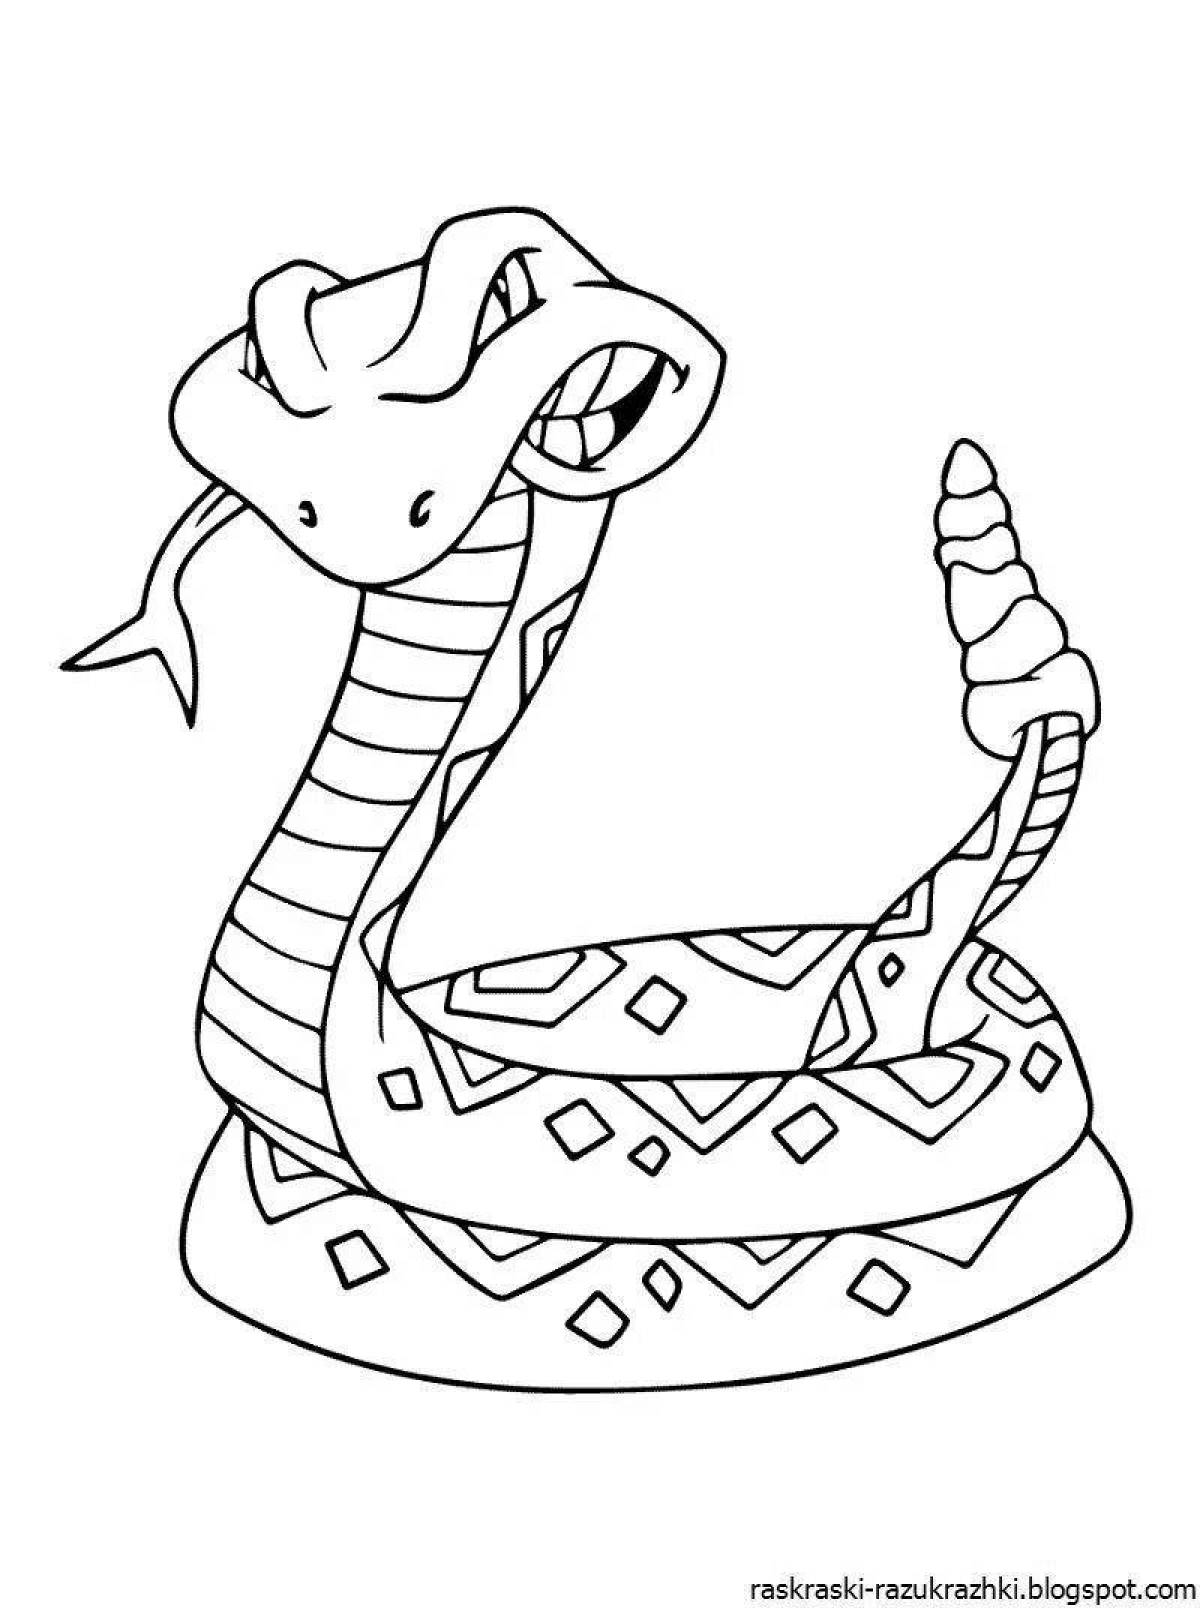 Colorful snake coloring page for kids